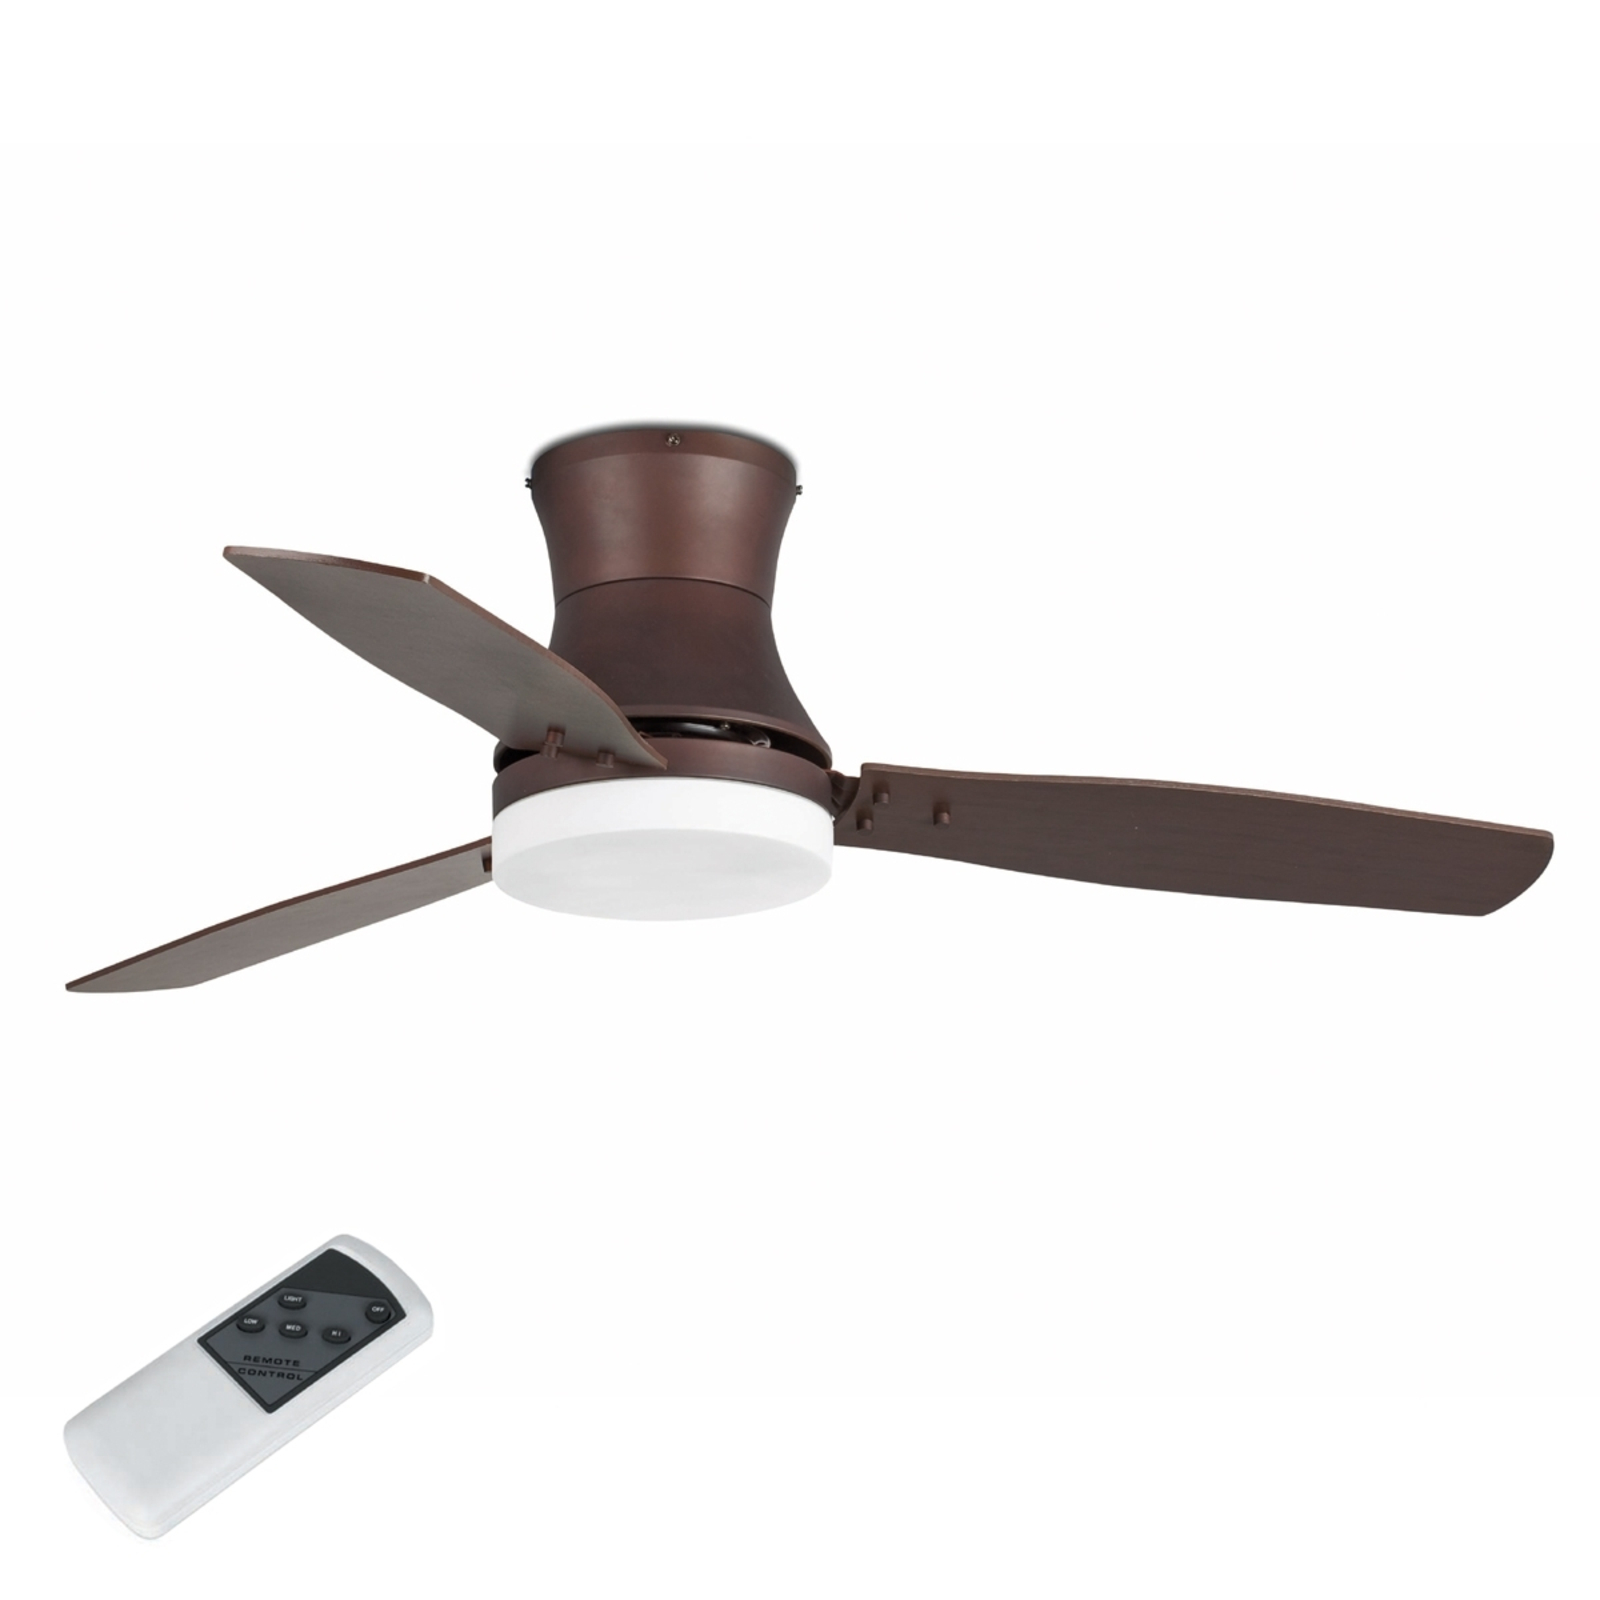 TONSAY Ceiling Fan, Dark Brown with Lighting